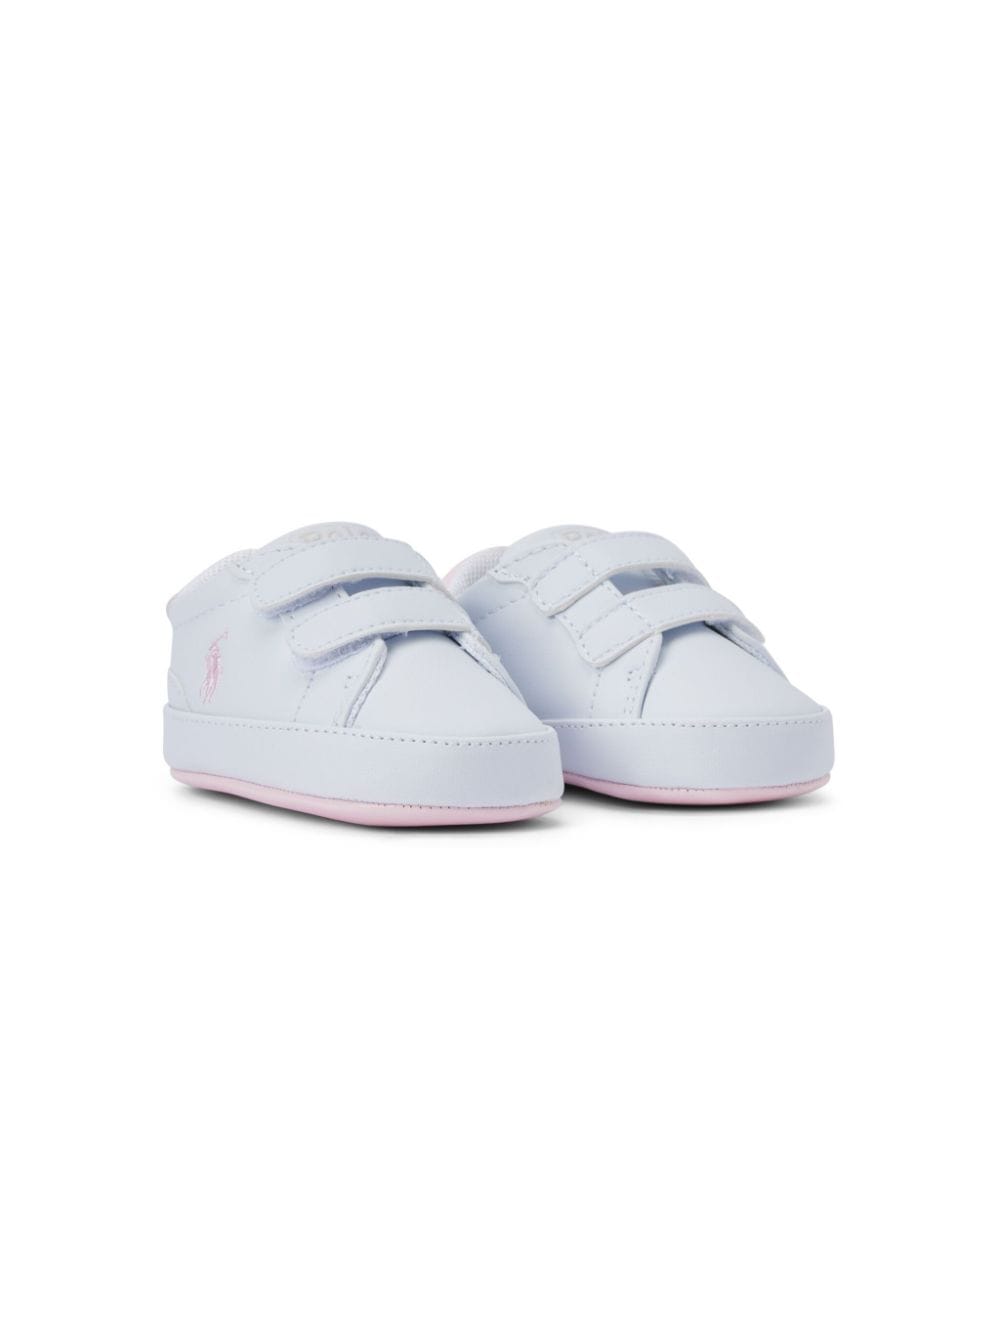 Ralph Lauren Babies' Polo Pony Touch-strap Sneakers In White